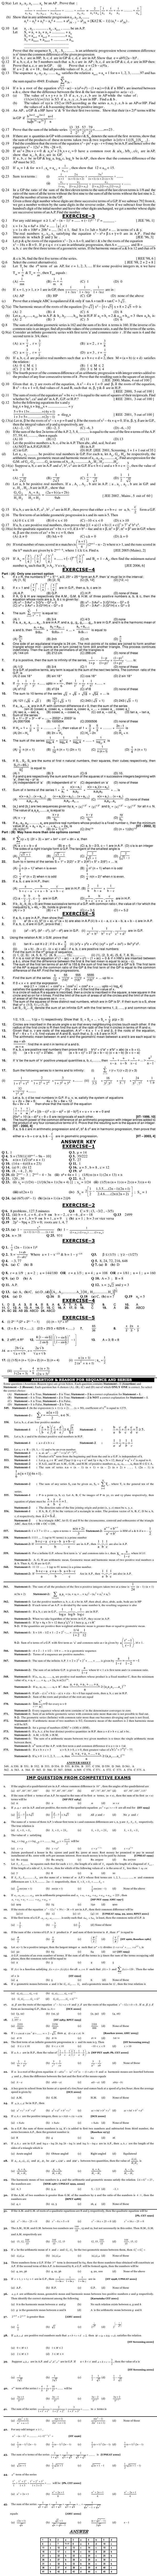 Maths Study Material - Chapter 3